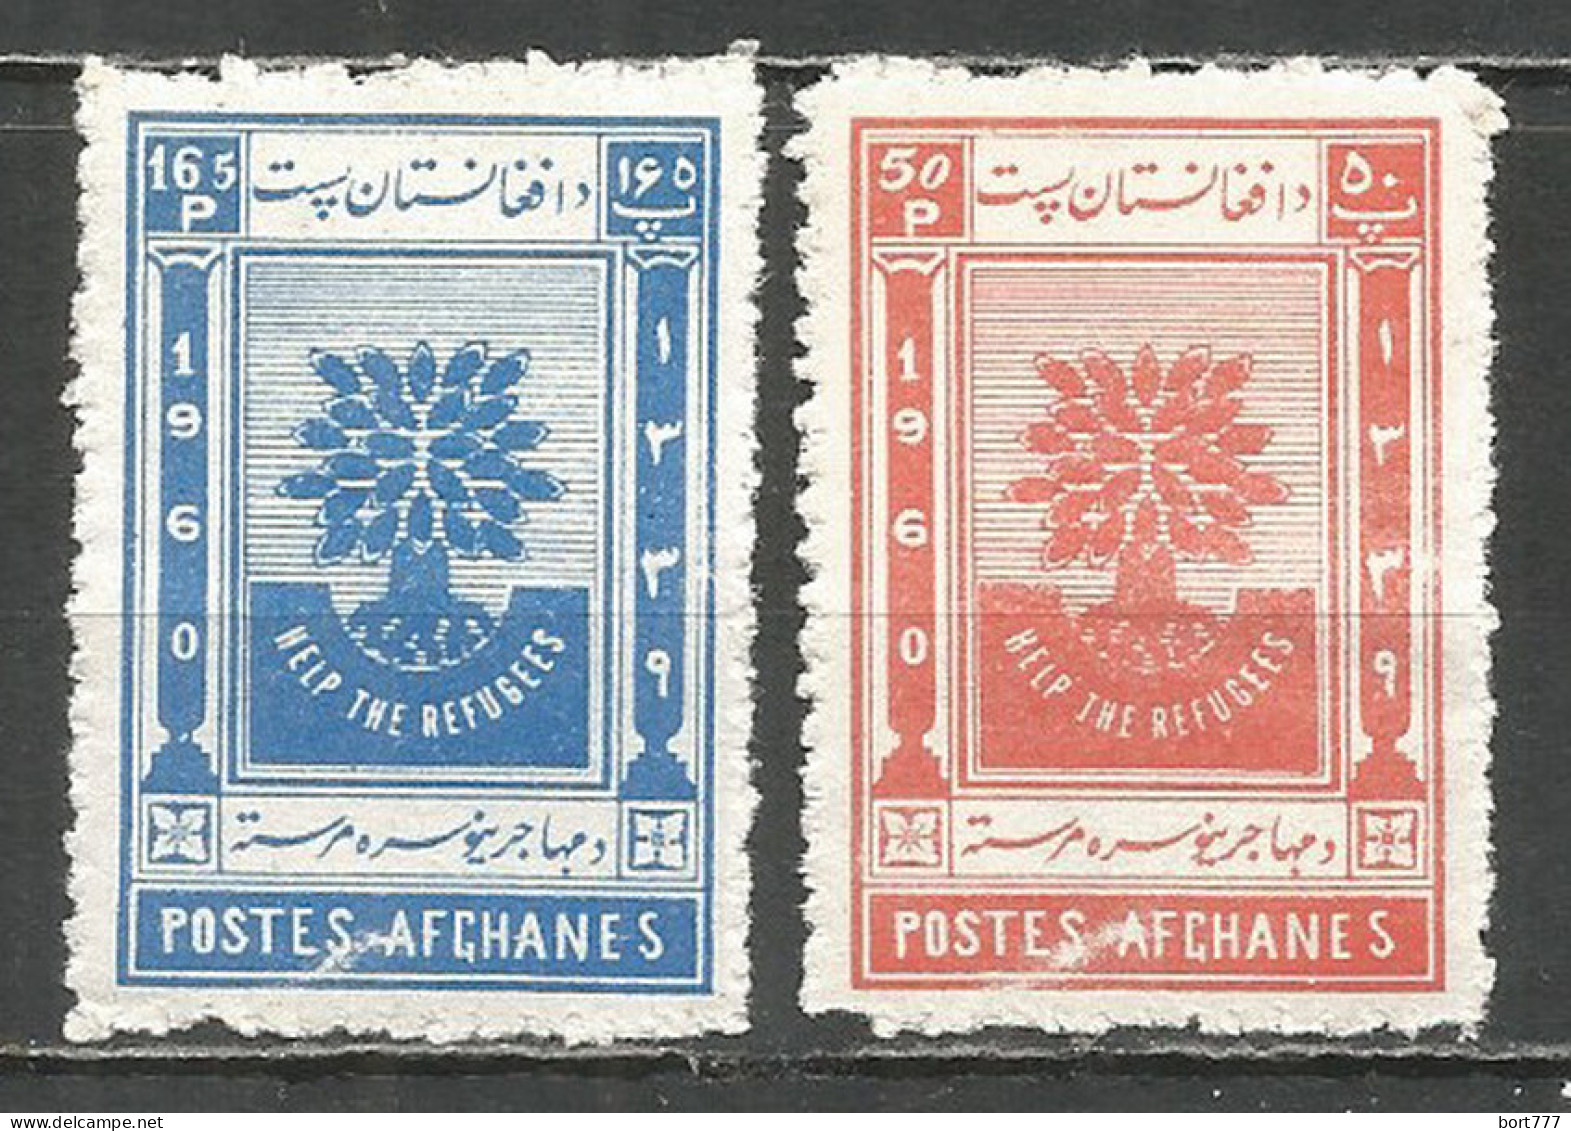 AFGHANISTAN 1960 Year, Mint Stamps MNH (**) - Afghanistan